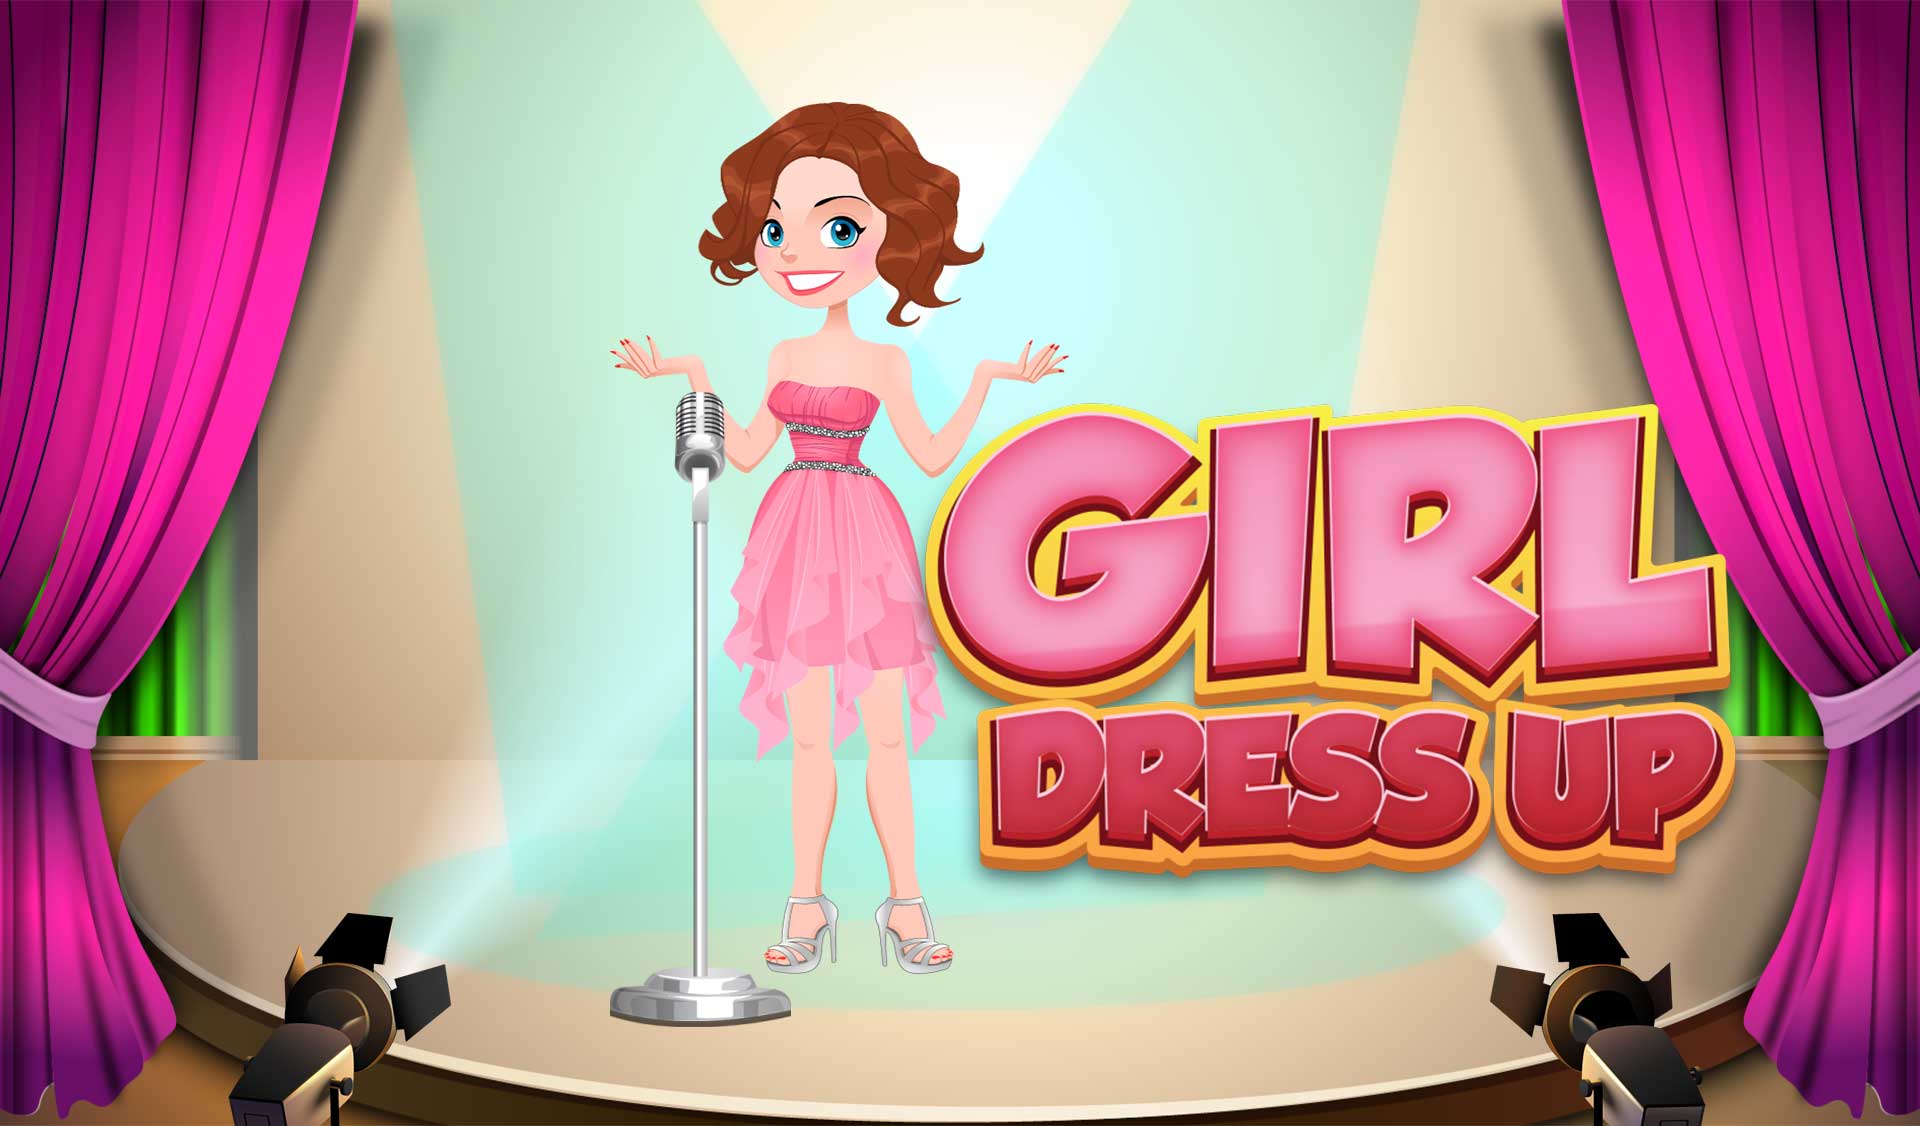 Girl Dress-Up Game - www.letshangout.com